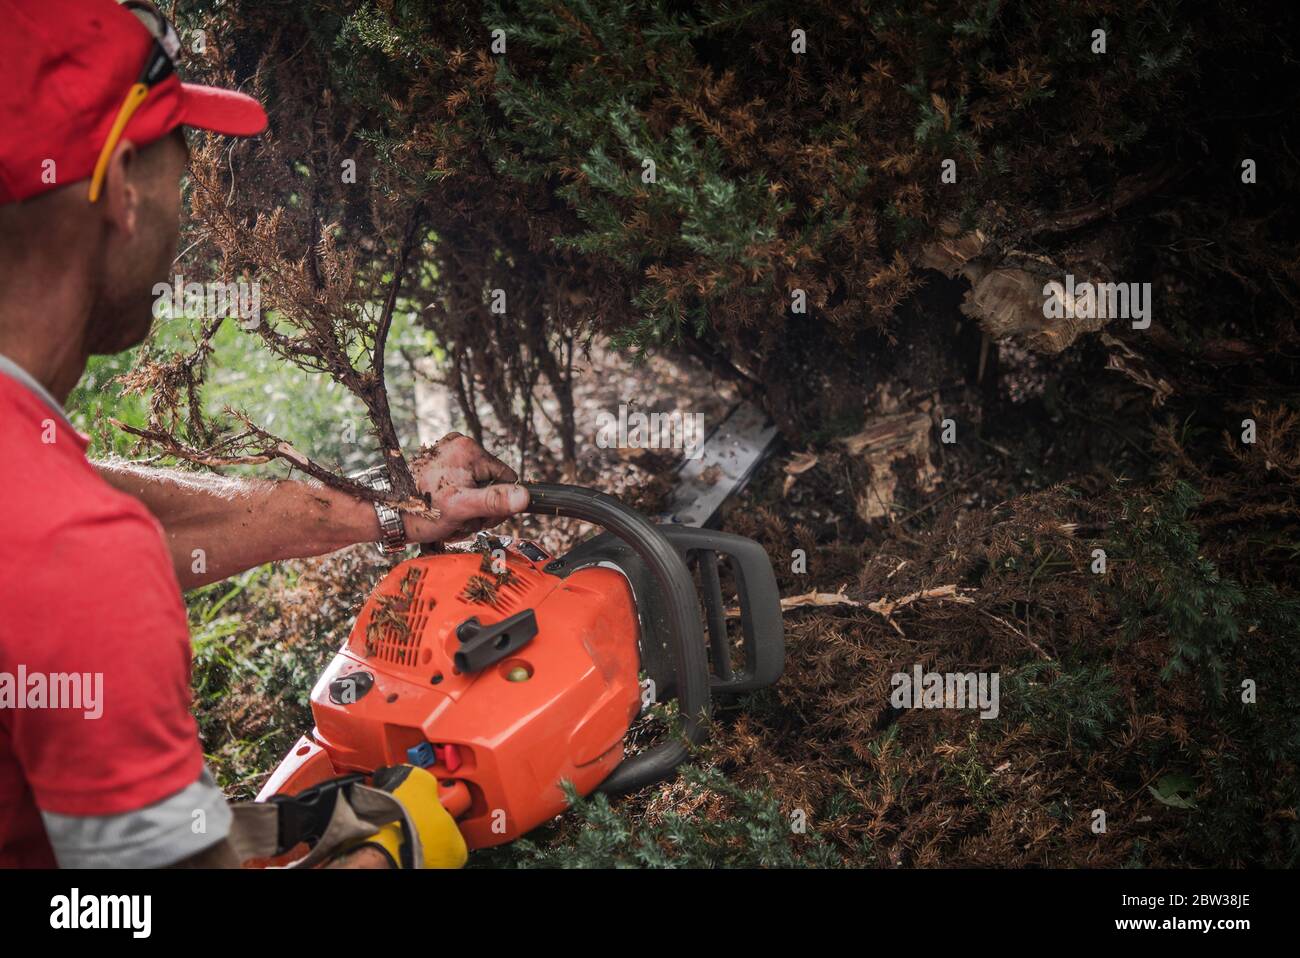 Gasoline Power Tool Job. Caucasian Men with Professional Chainsaw Cutting Out Bushes. Stock Photo